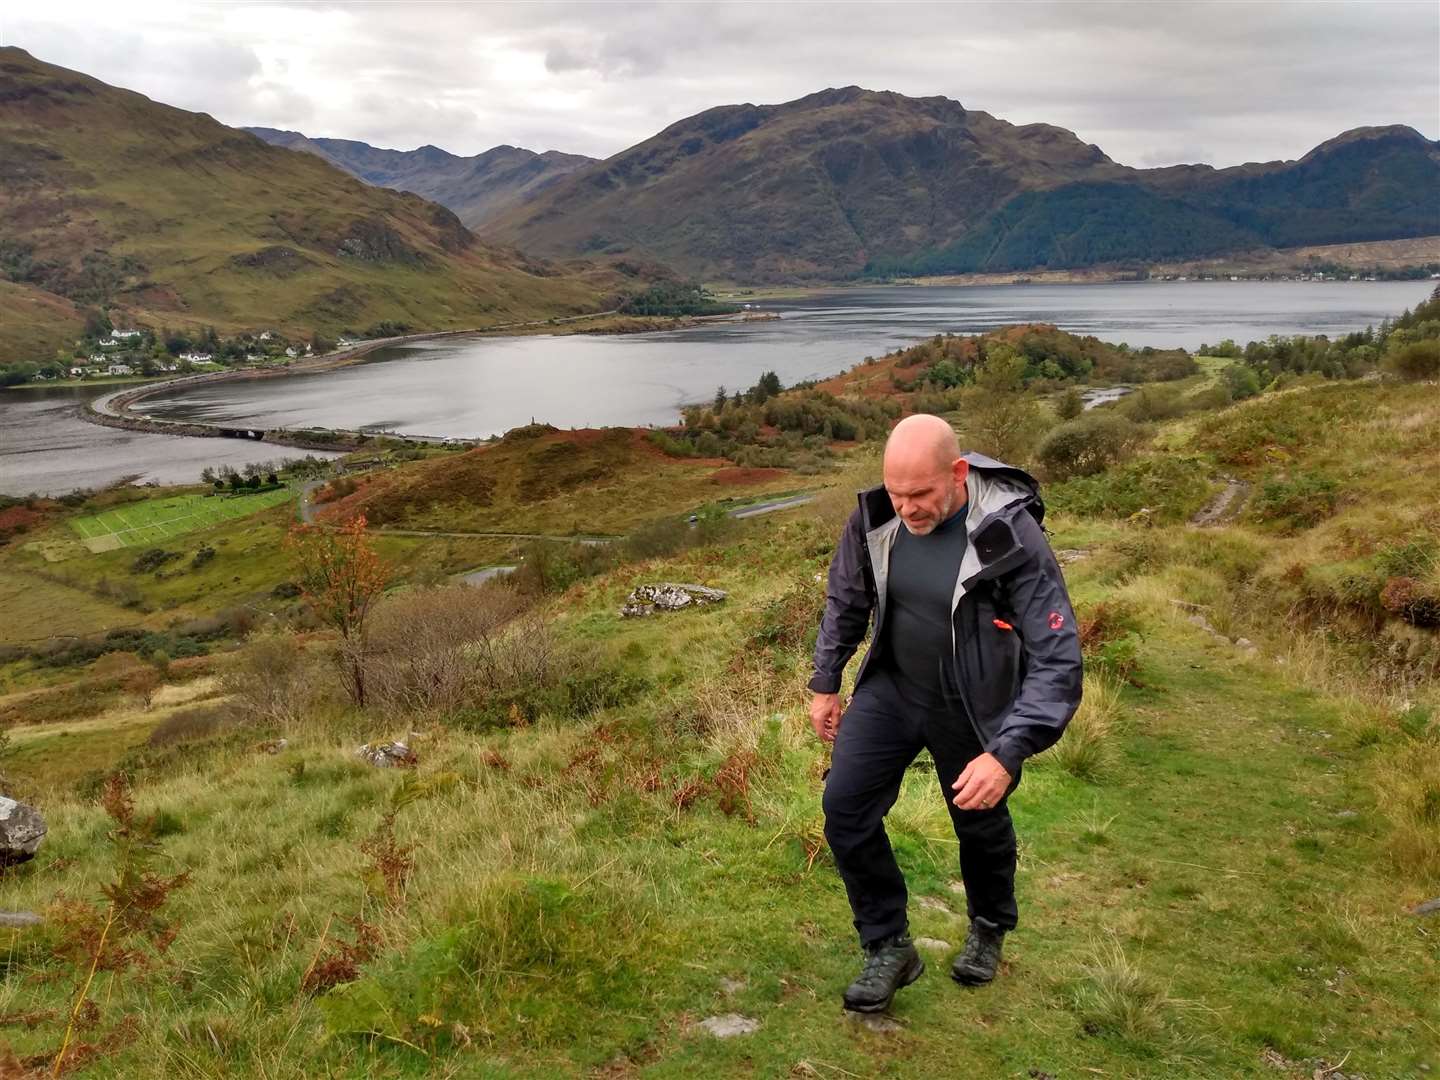 Eric climbs up the path with Loch Duich and the causeway behind.